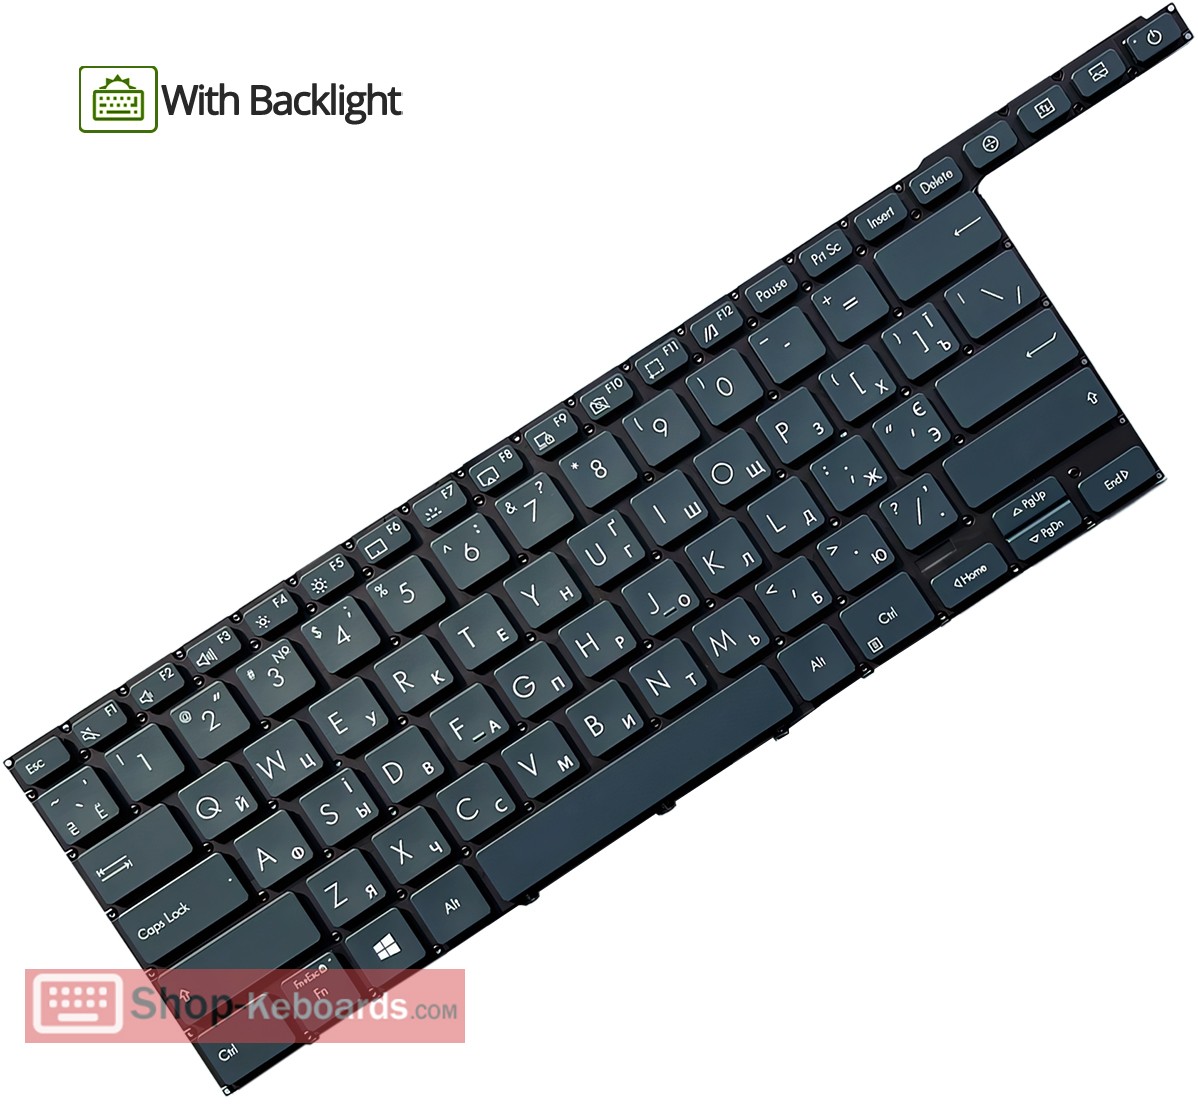 Asus 0KNB0-6823BR00  Keyboard replacement